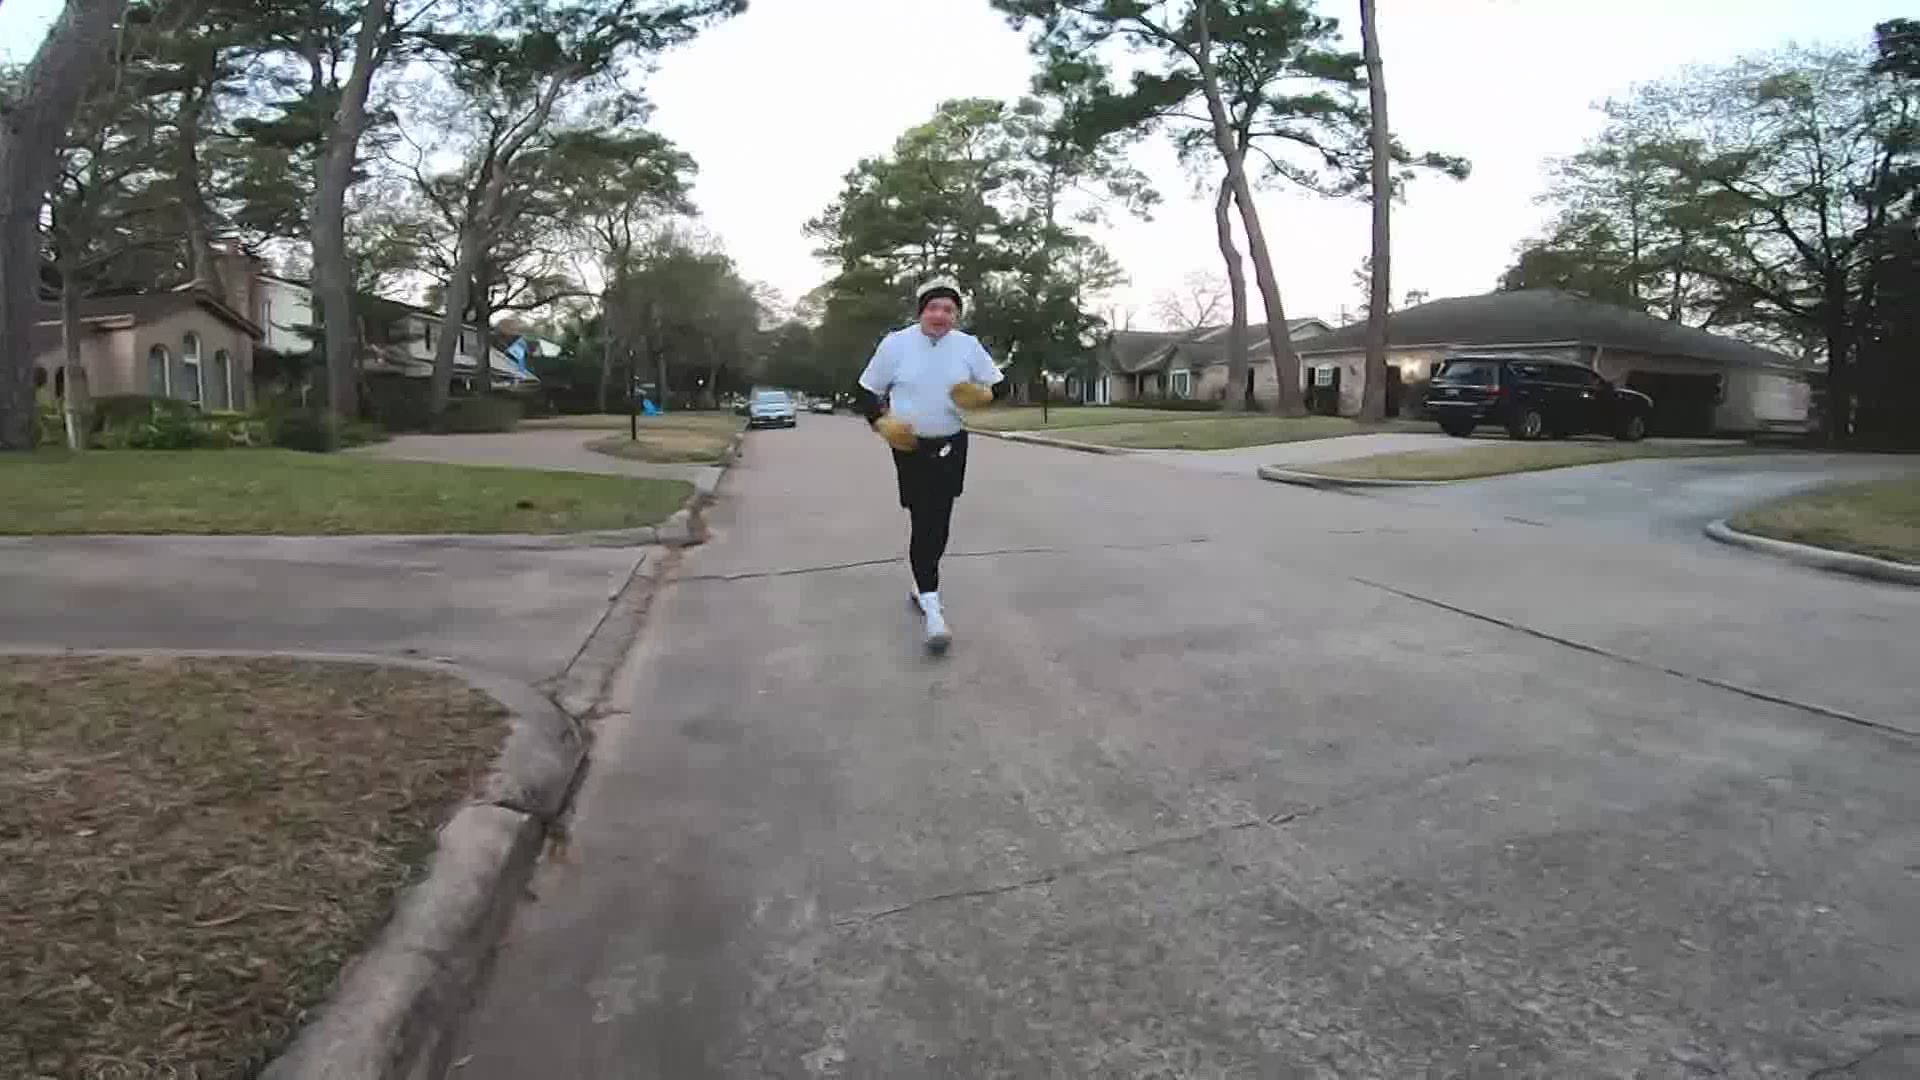 At an age when most are winding down, Phil Smith is lacing up and picking up the pace. Saturday marks his 40th consecutive year running the Houston Marathon.